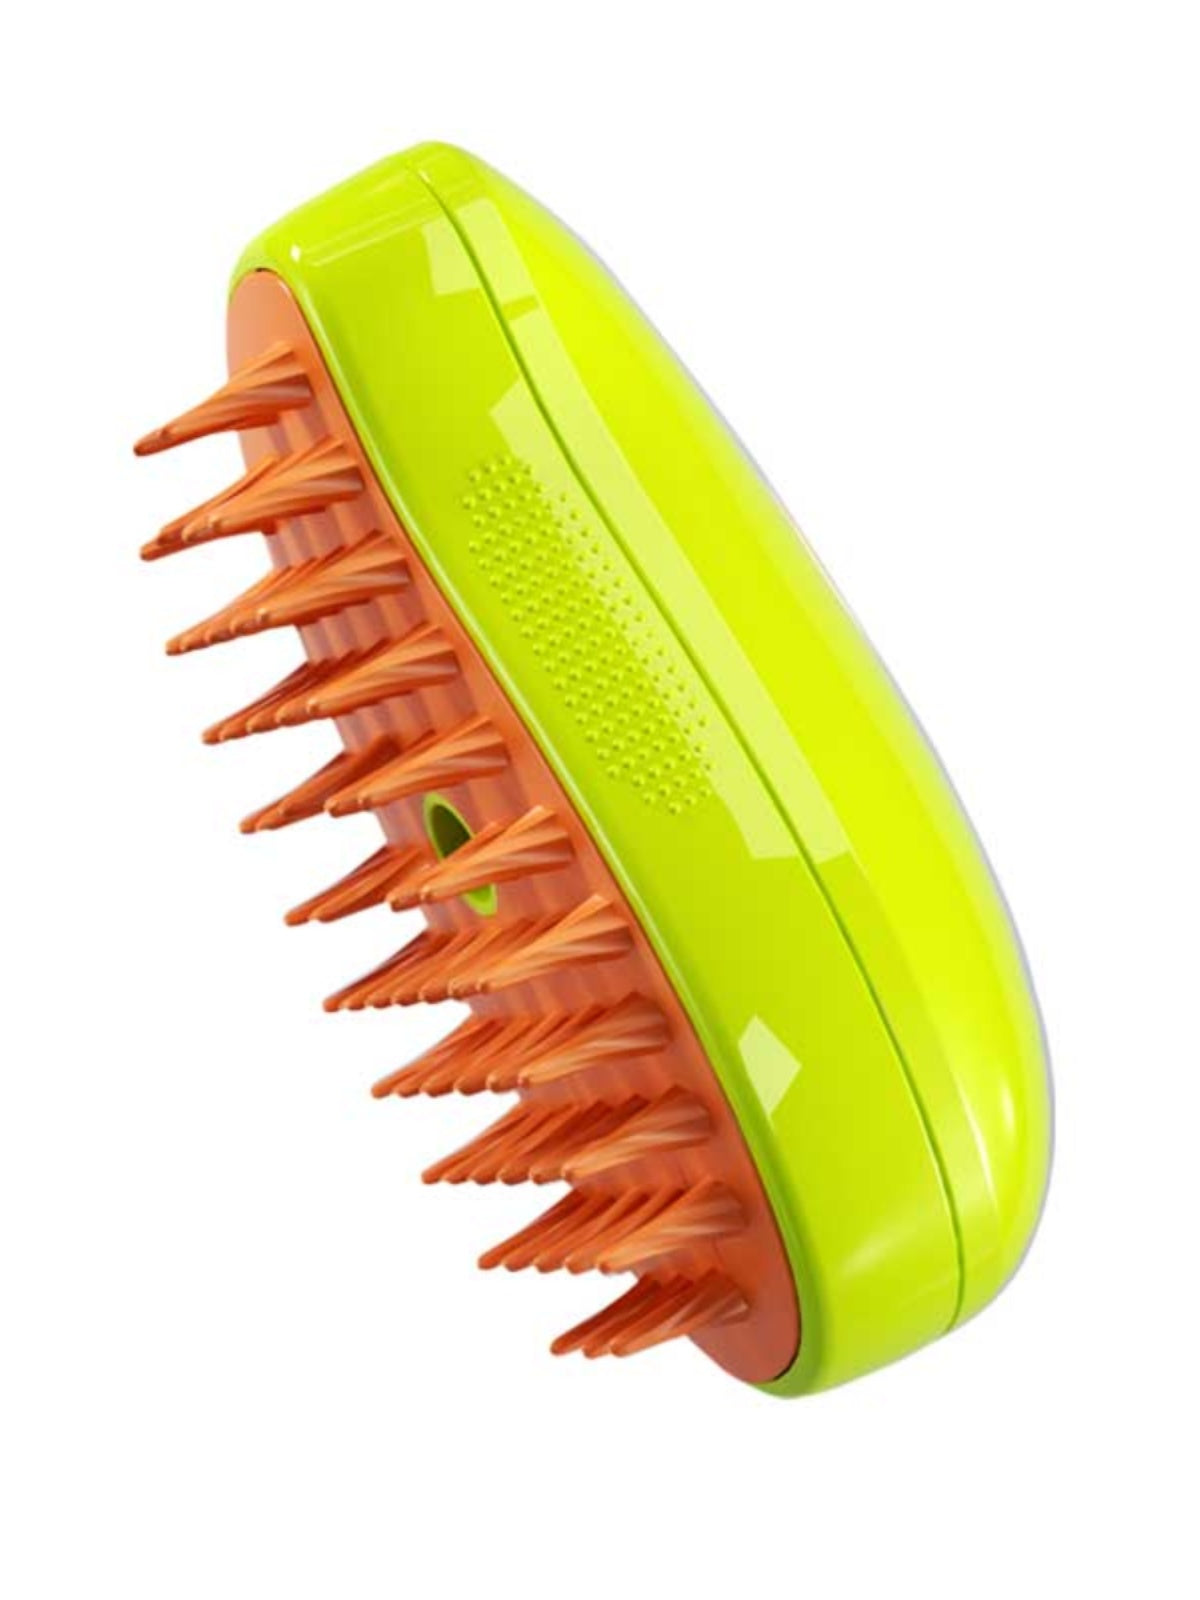 Steamy cat Brush Electric Spray Comb Hair Brush For Removing